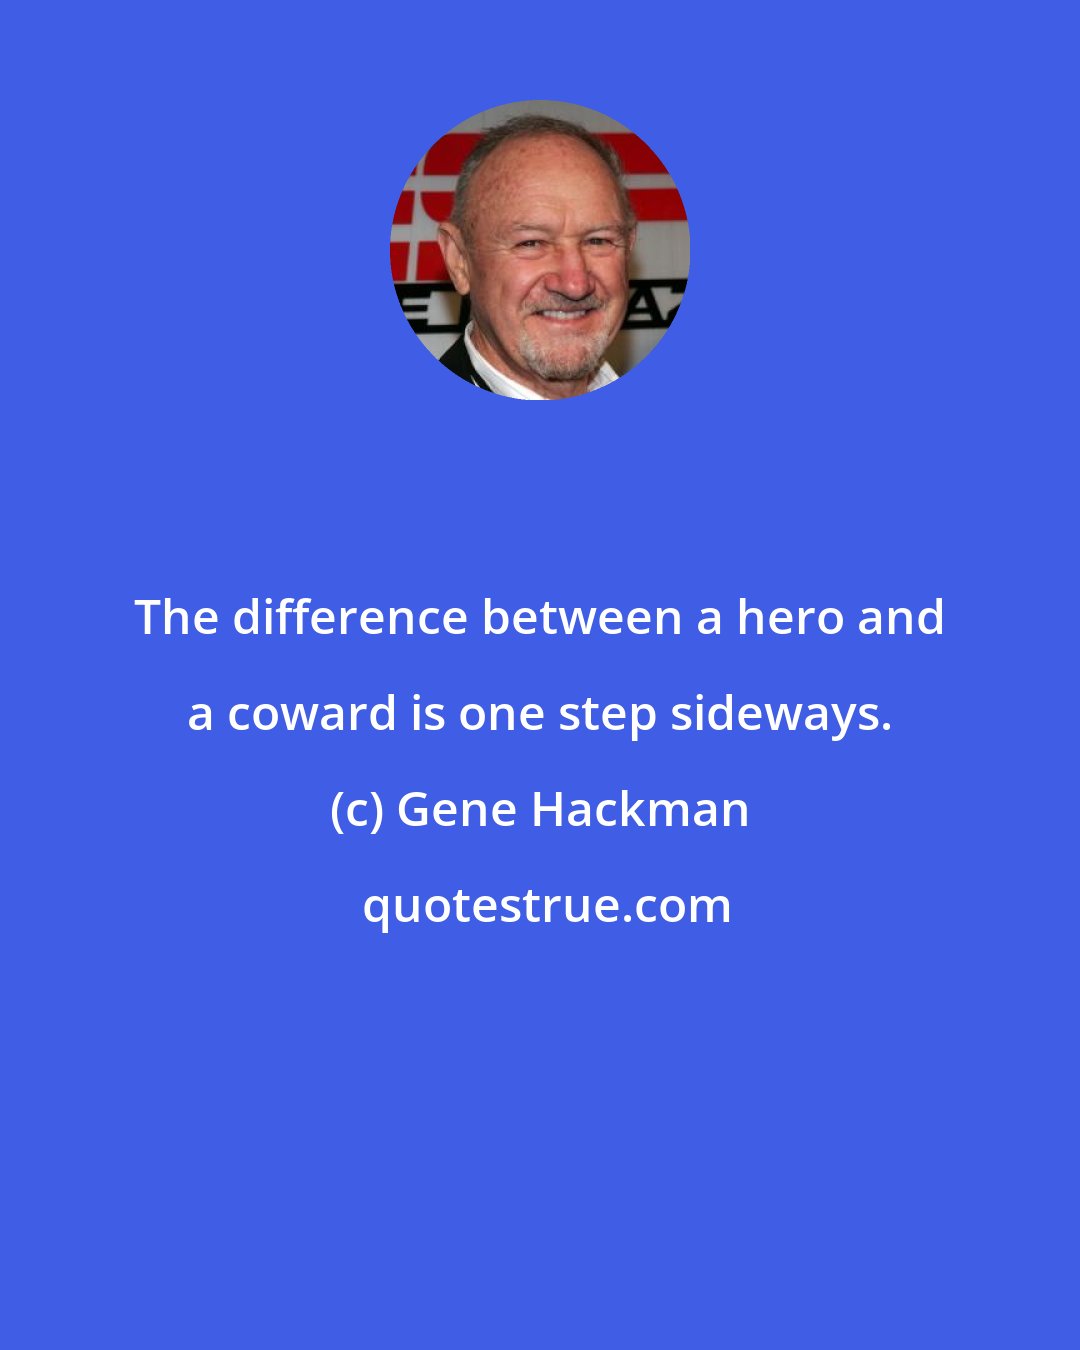 Gene Hackman: The difference between a hero and a coward is one step sideways.